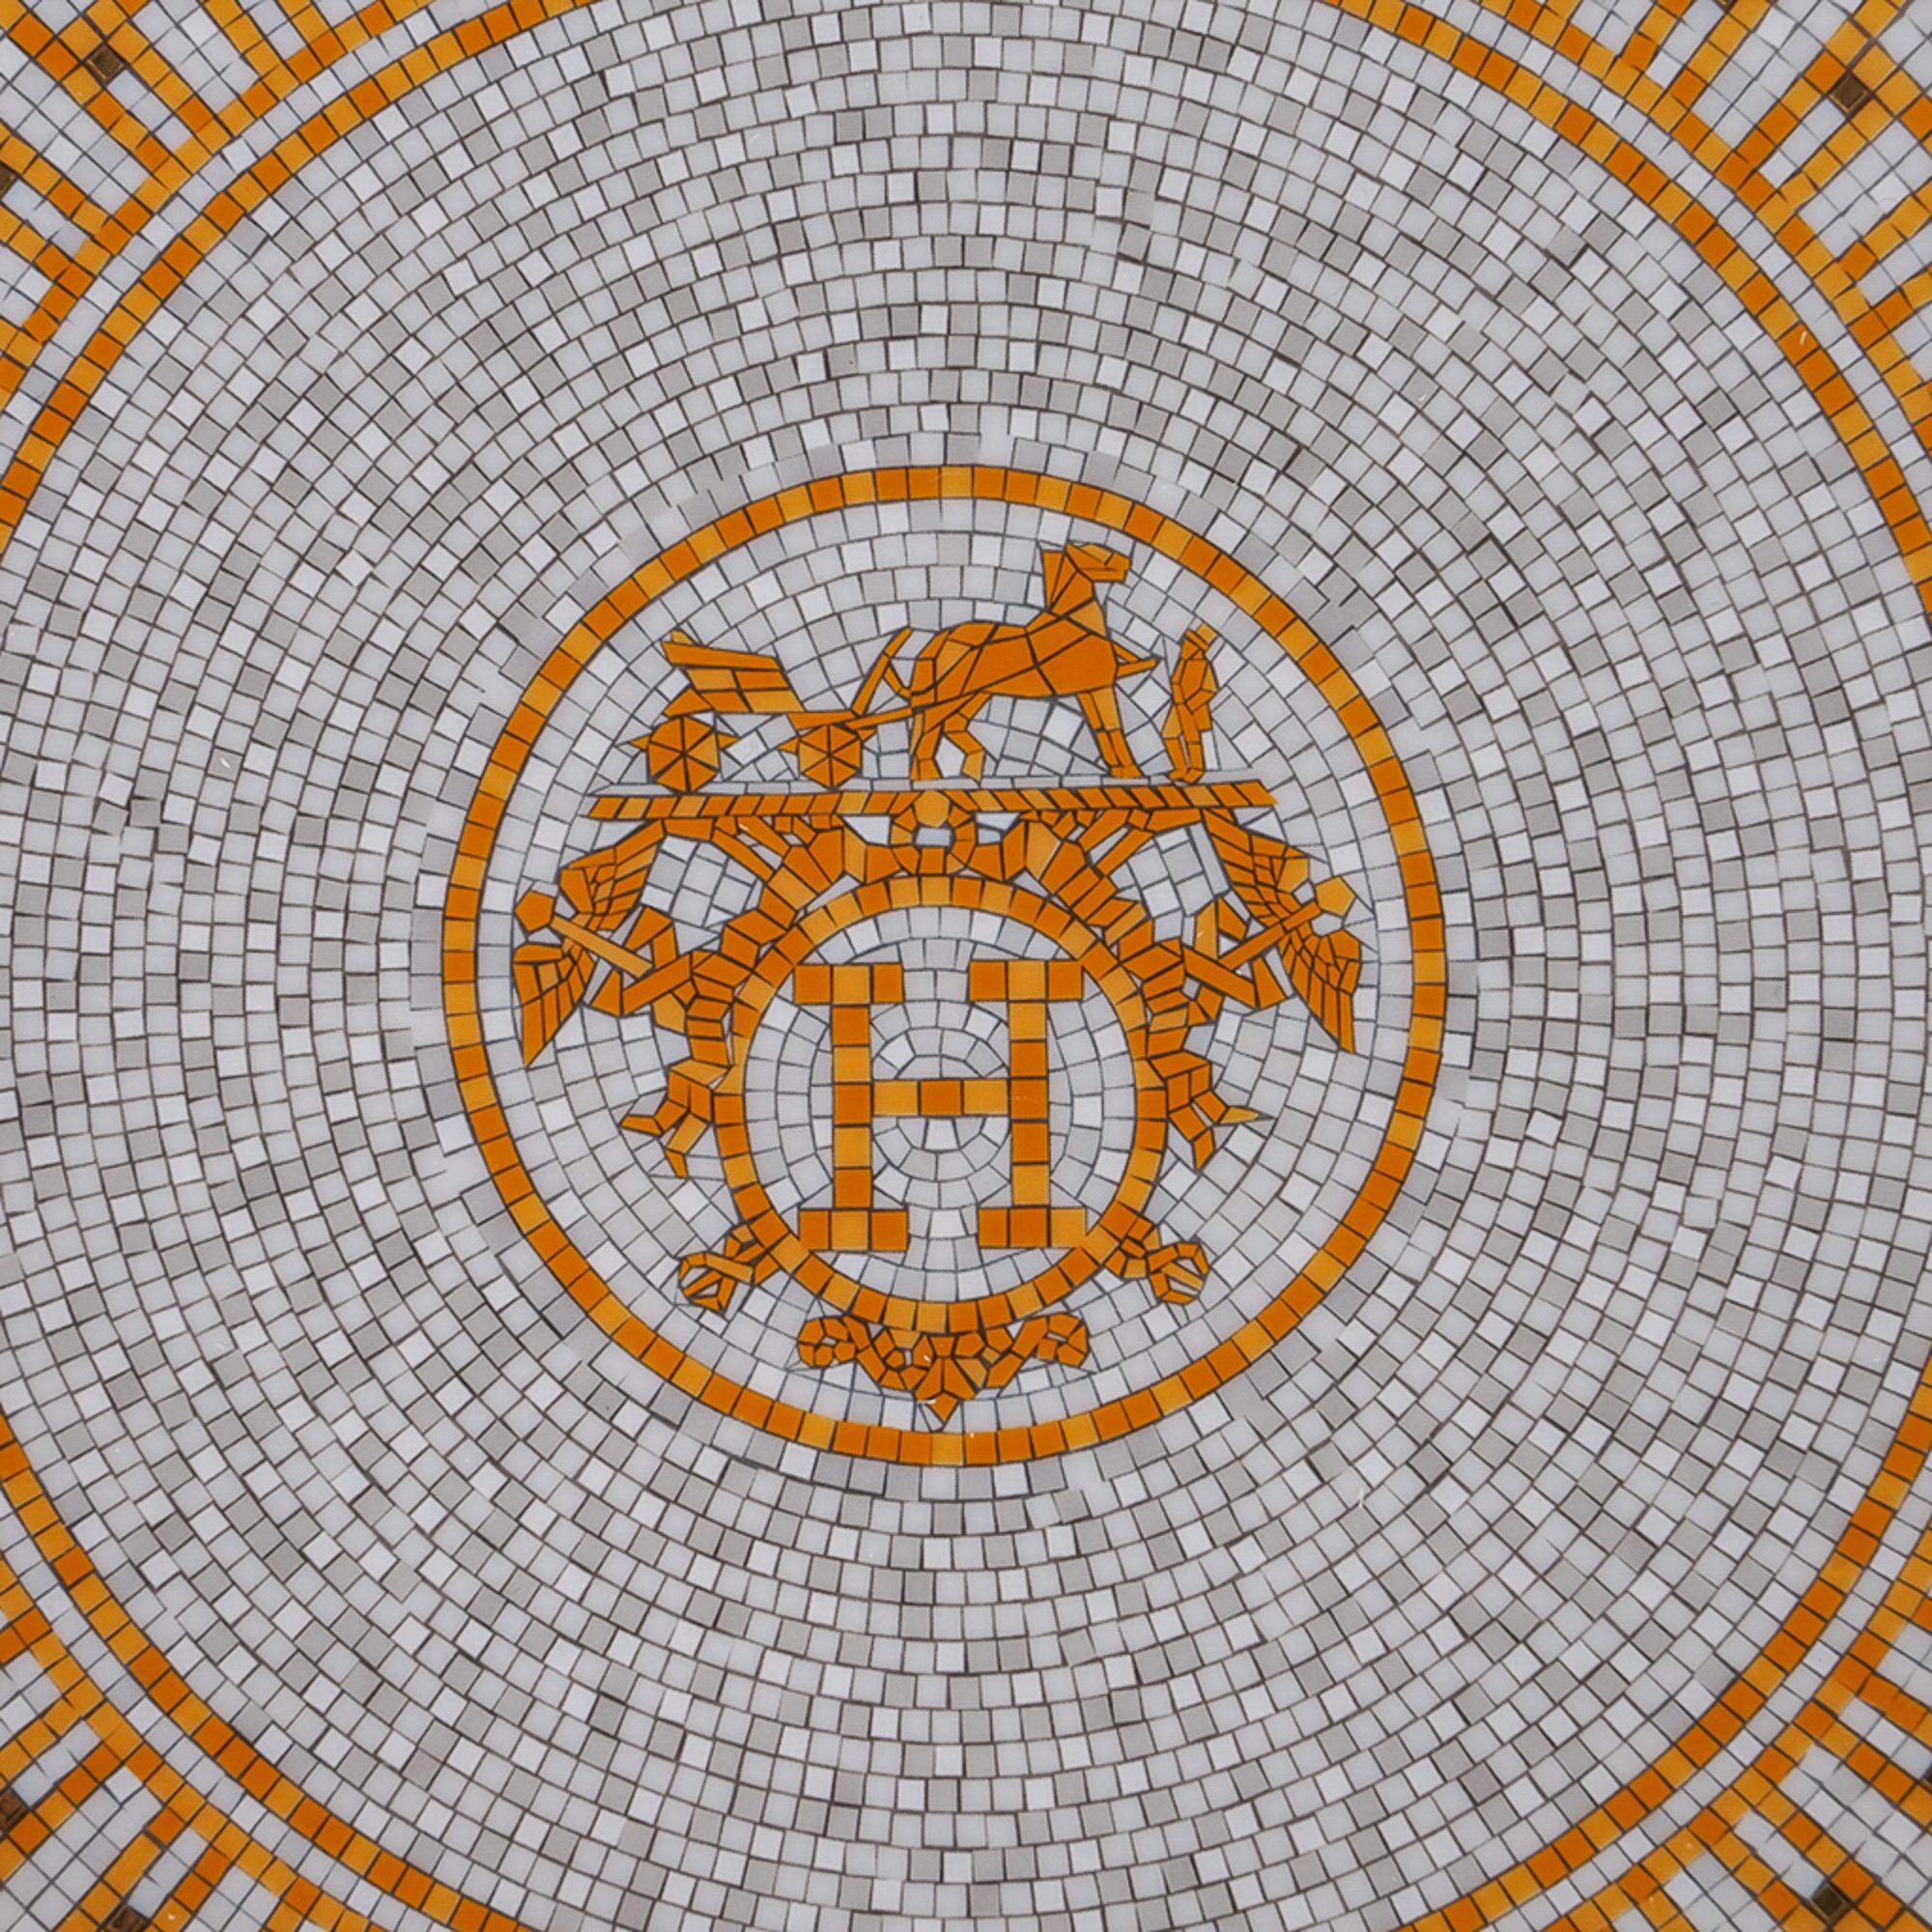 Mightychic offers a gold Hermes Mosaique Au 24 Dessert Plate featured in porcelain.
The mosaic motif reflects the mosaic floor at the entrance of the 24 Faubourg St. Honore flagship store in Paris.
For an elegant table.
Wonderful for home or